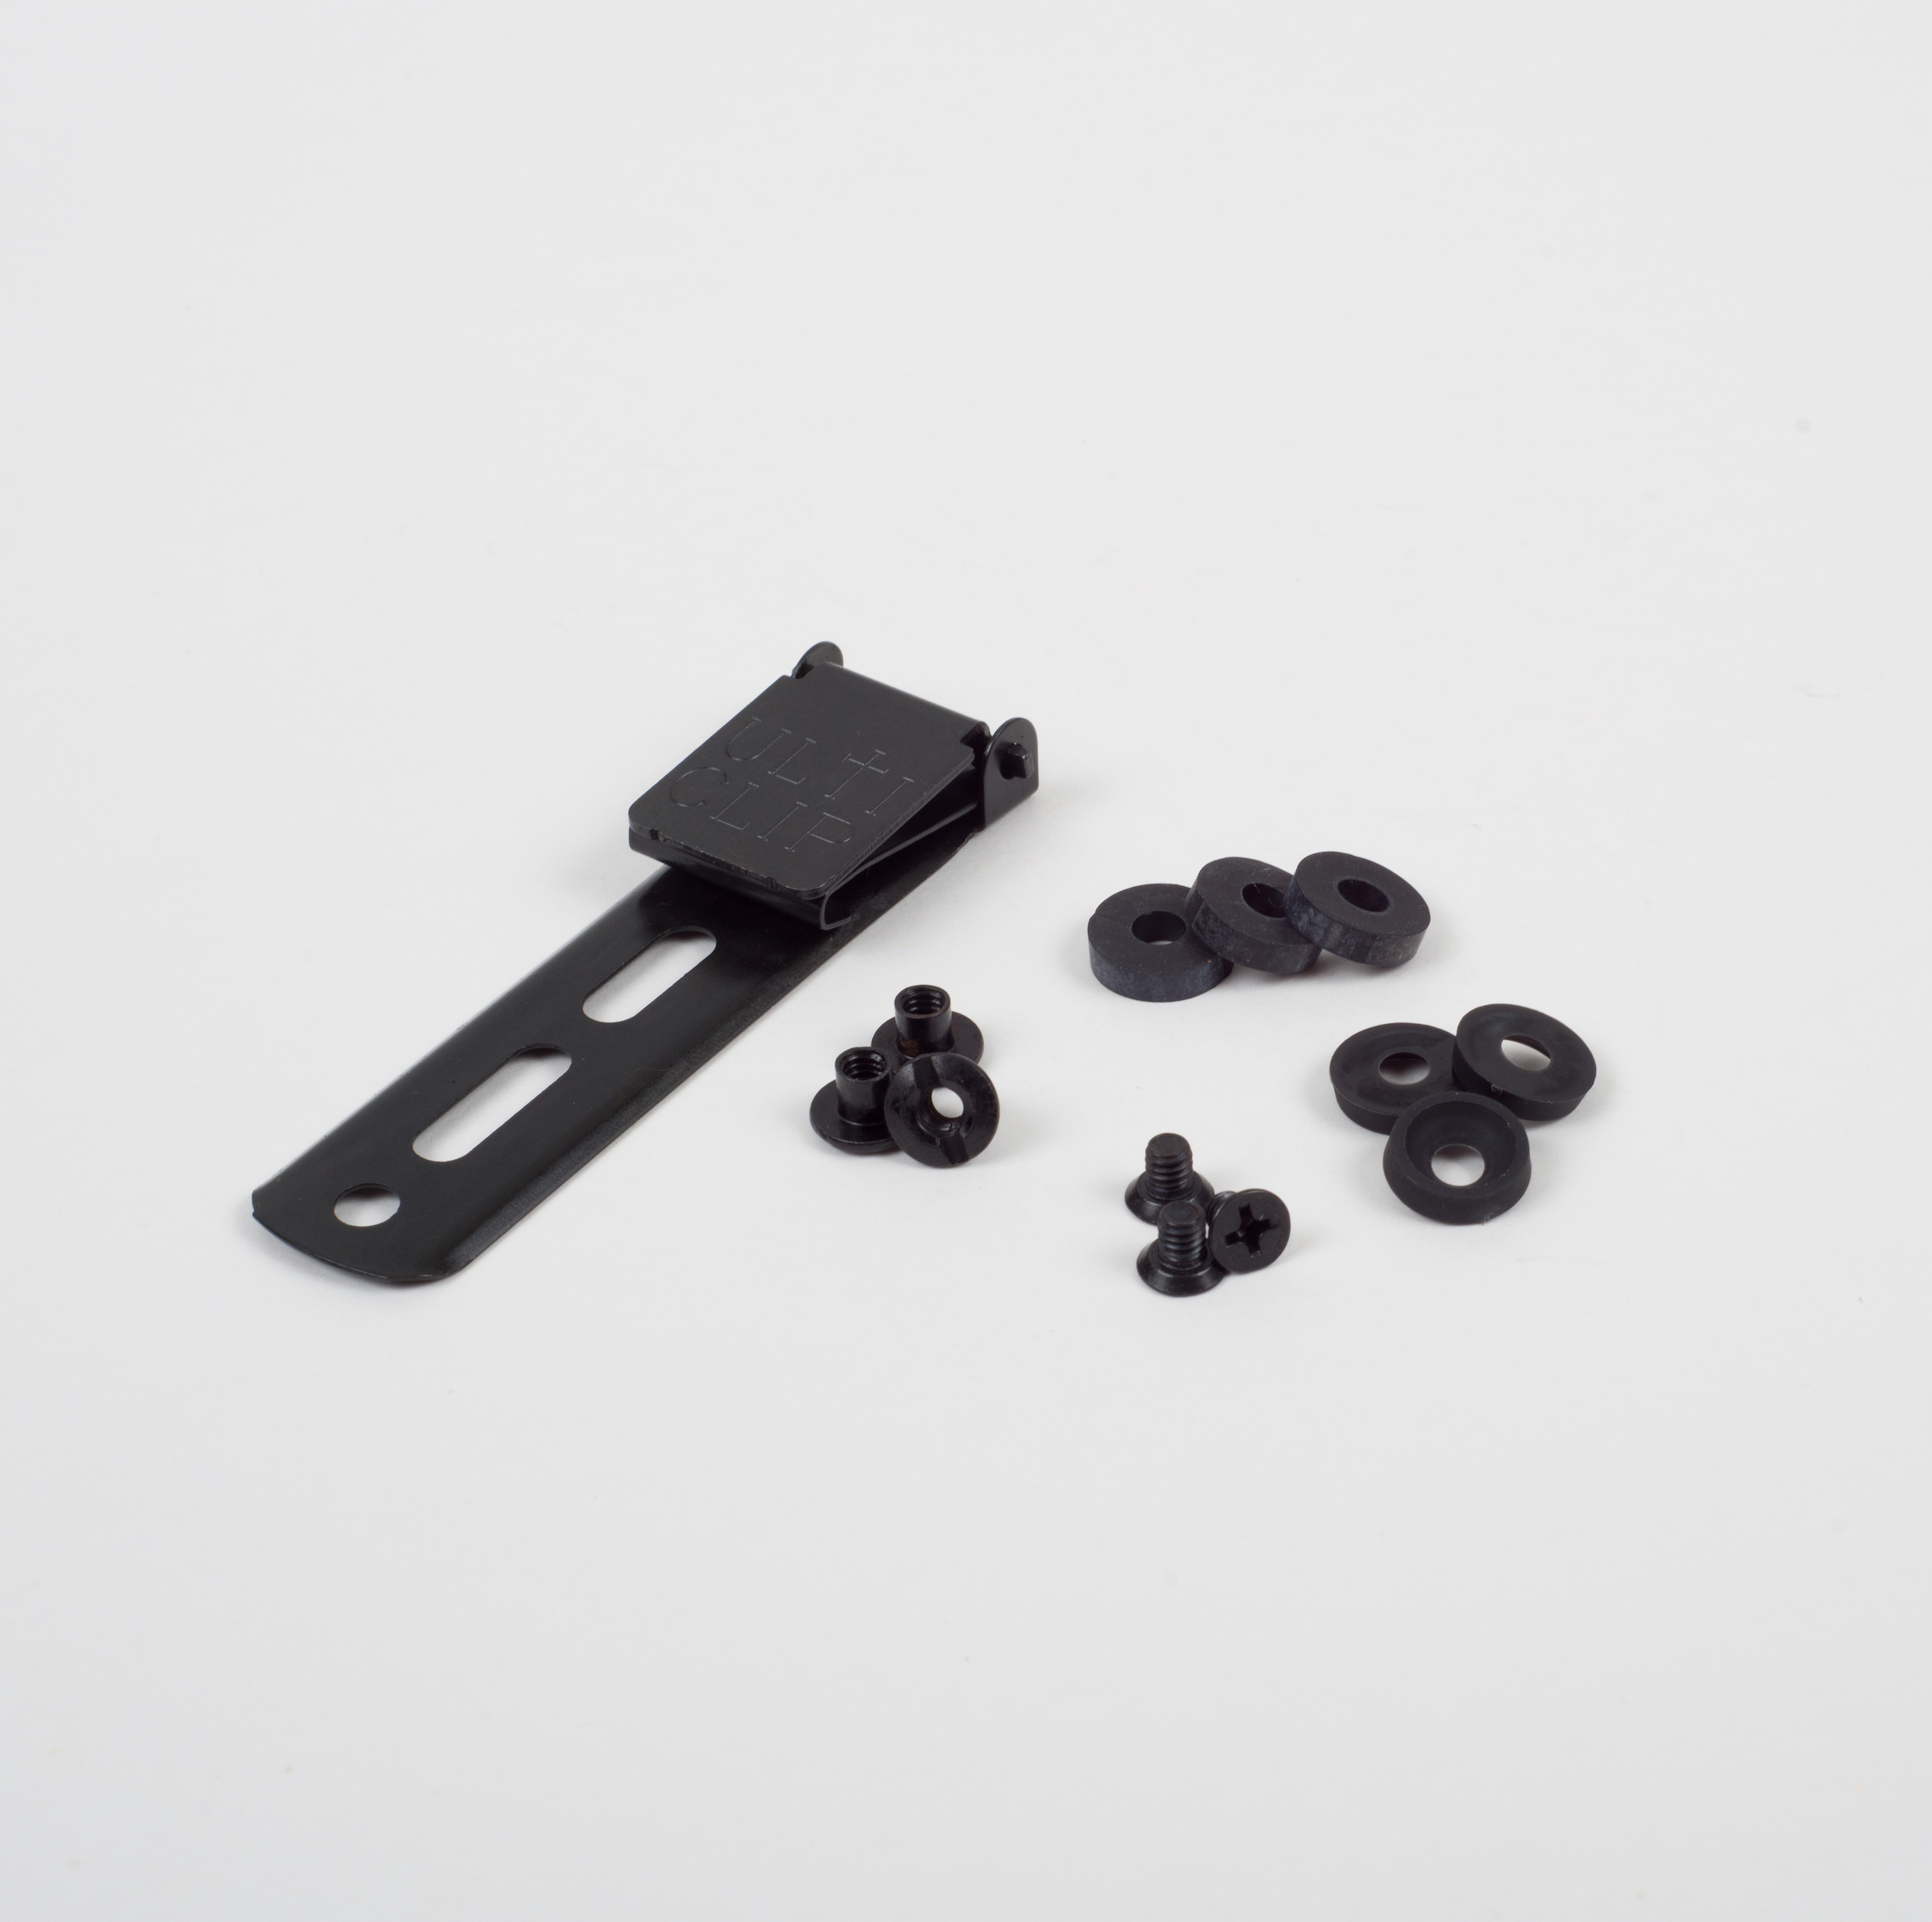 Ultiplate Mounting Plate for Ulticlip